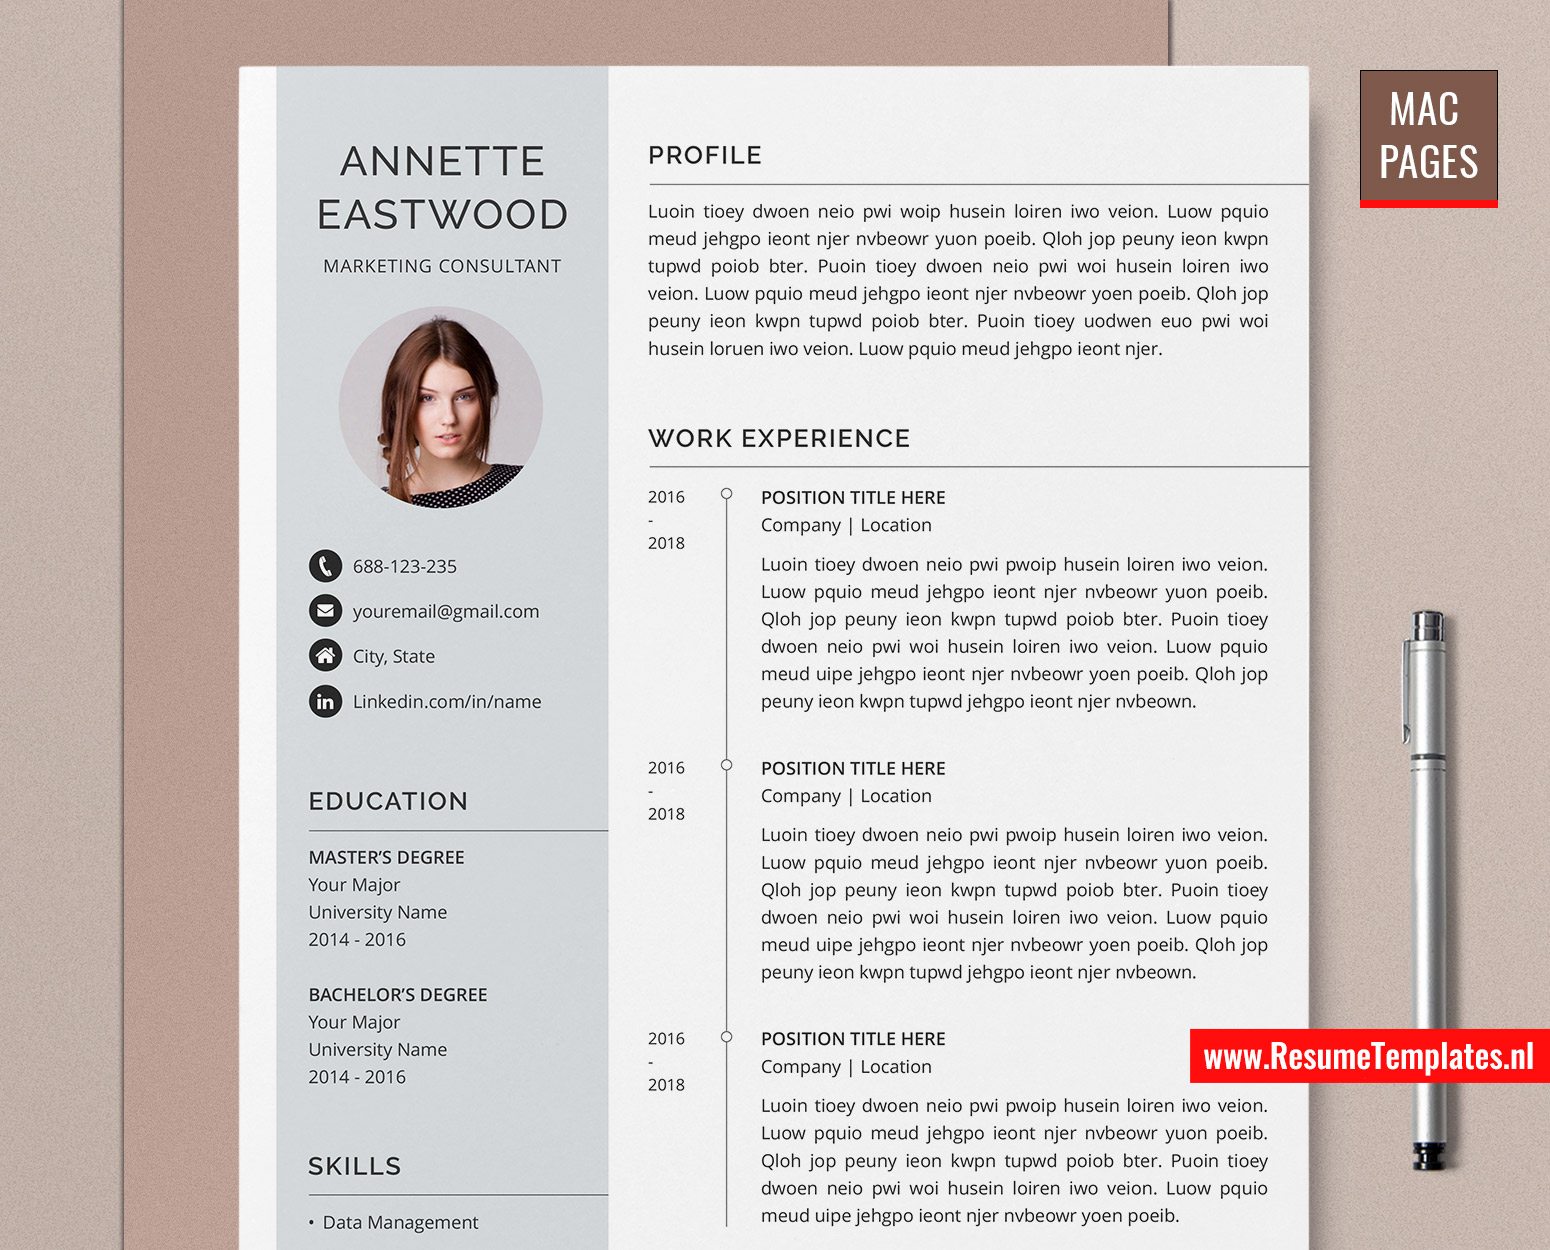 For Mac Pages Professional Resume Template / CV Template for Mac Pages